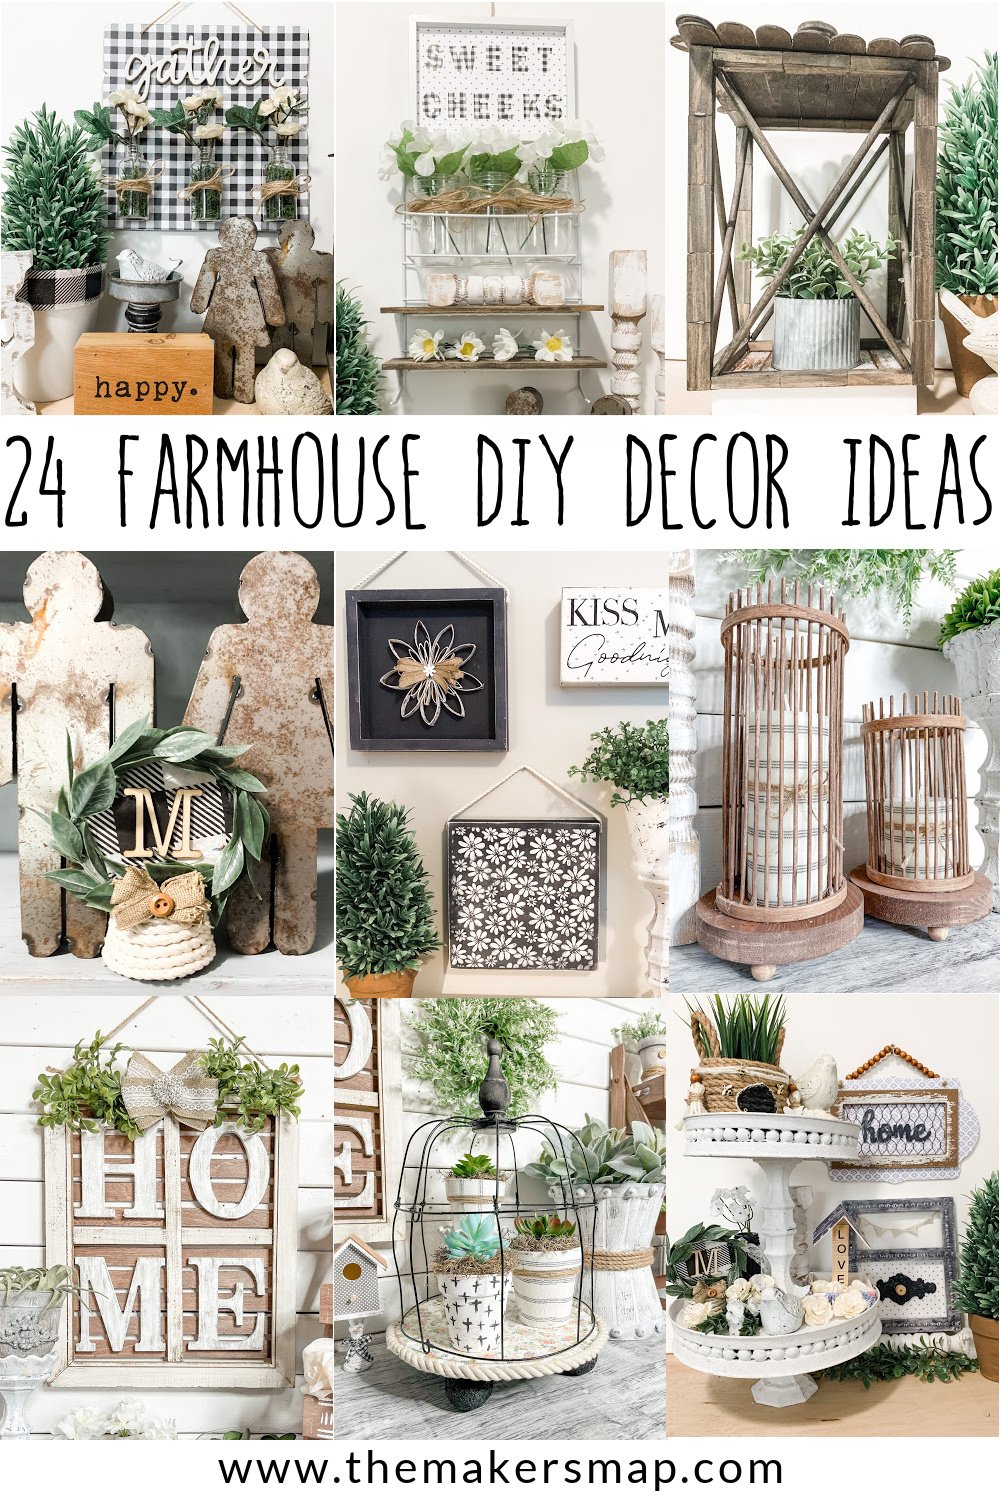 24 Farmhouse Decor DIY Ideas - The Makers Map with Amber Strong